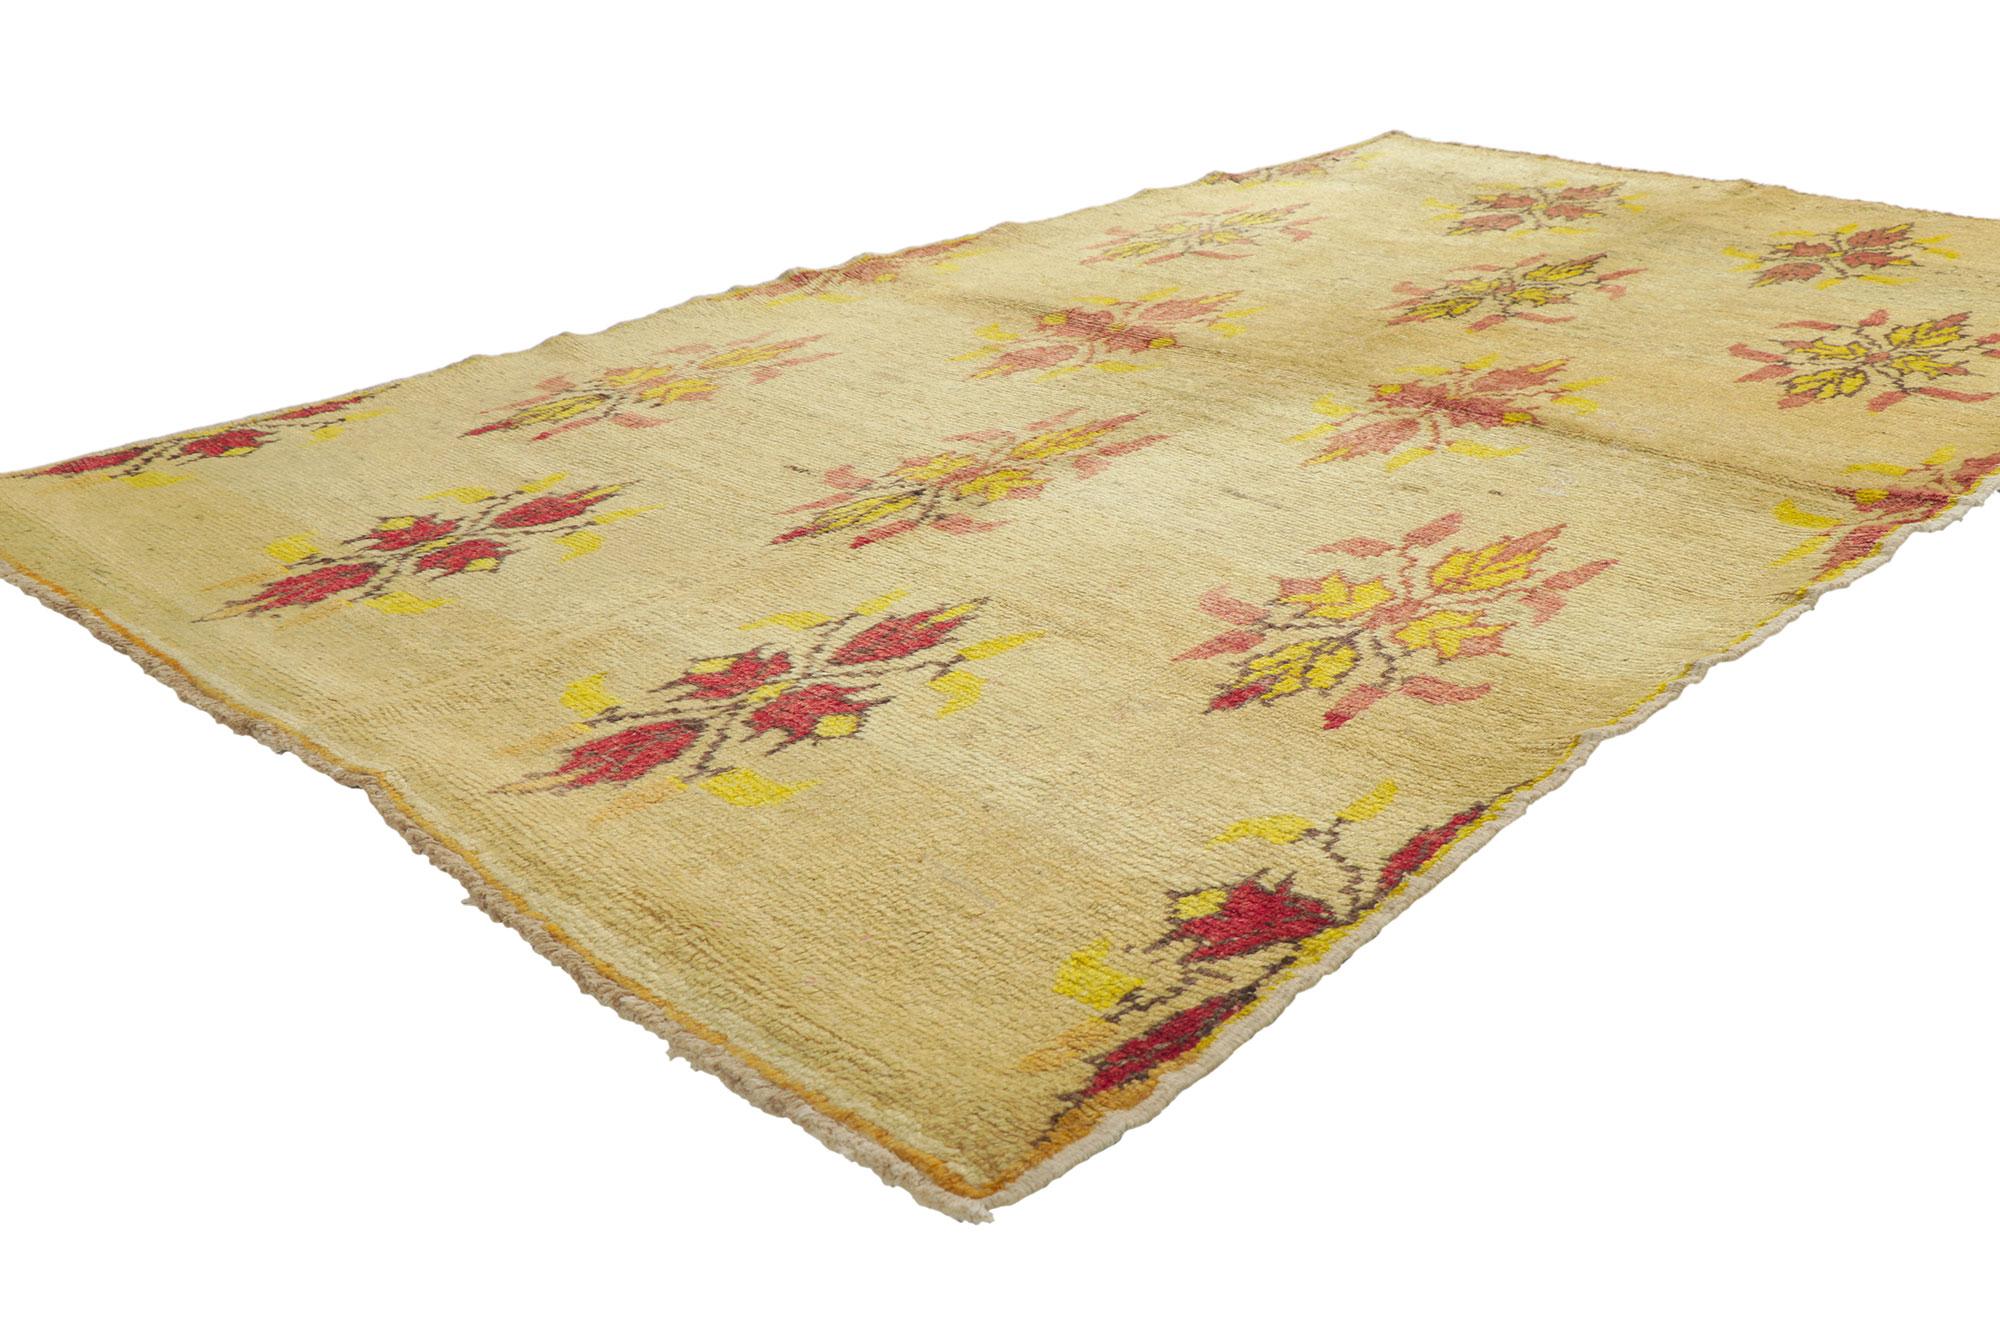 50141 Vintage Turkish Oushak Rug with Modern Rustic and Biophilic Prairie Style 04'06 X 07'01. Reflecting elements of the Prairie School Movement and Biophilic design, this hand knotted wool vintage Turkish Oushak rug features an all-over botanical